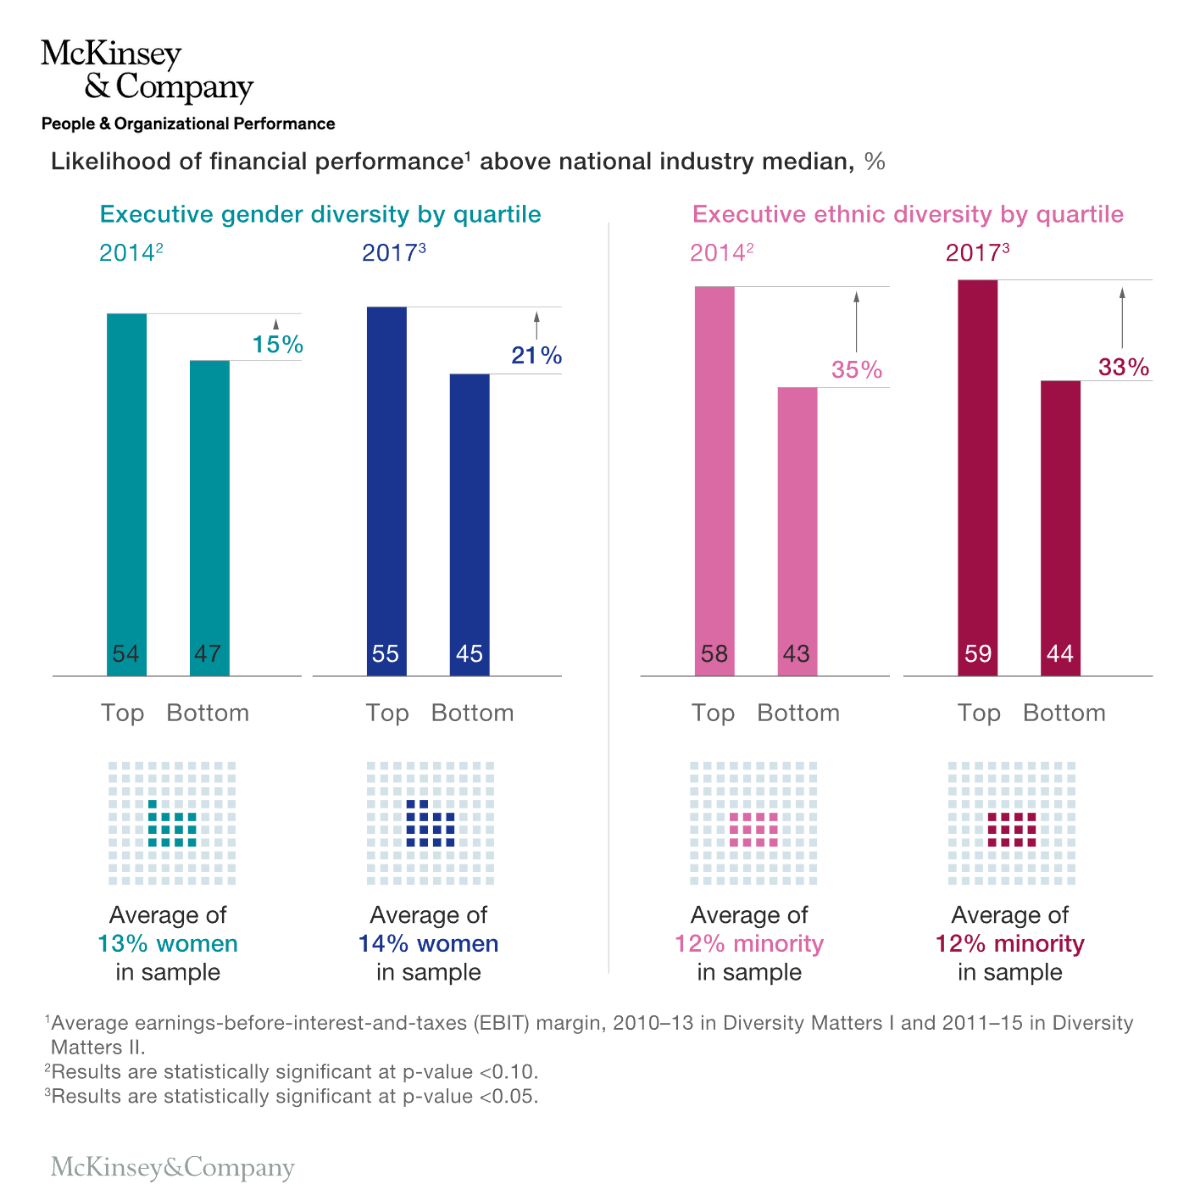 Bar graph showing the financial performance according to gender and ethnic